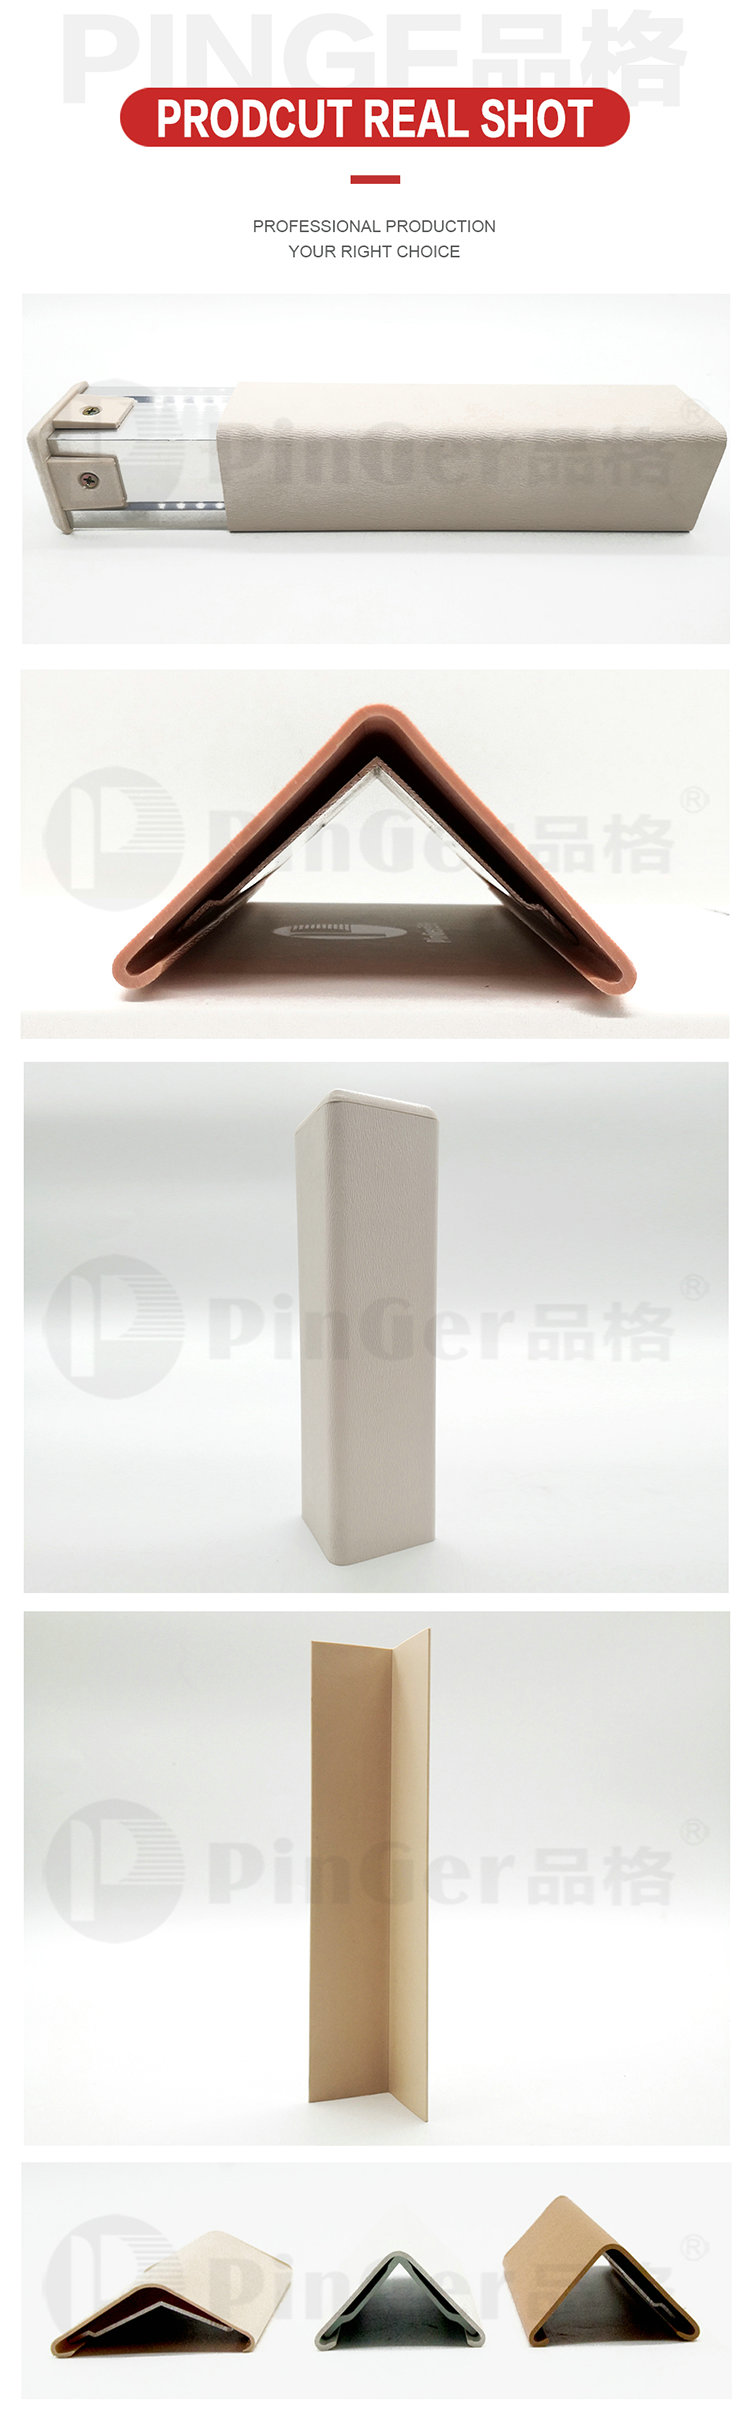 High Quality 90° commercial vinyl wall corner guards